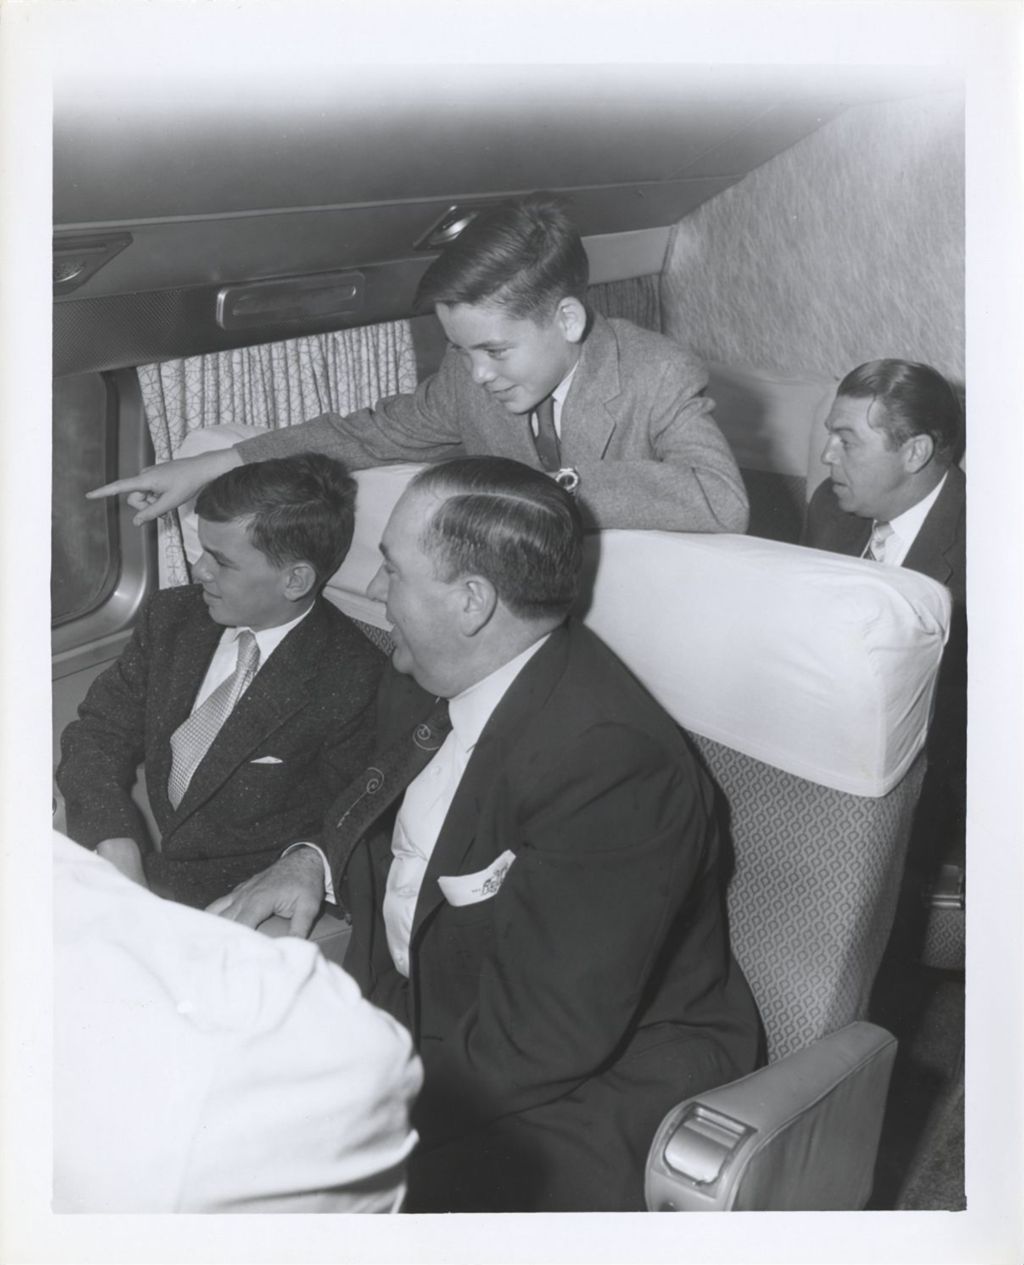 Opening of St. Lawrence Seaway, Richard J. Daley in airplane